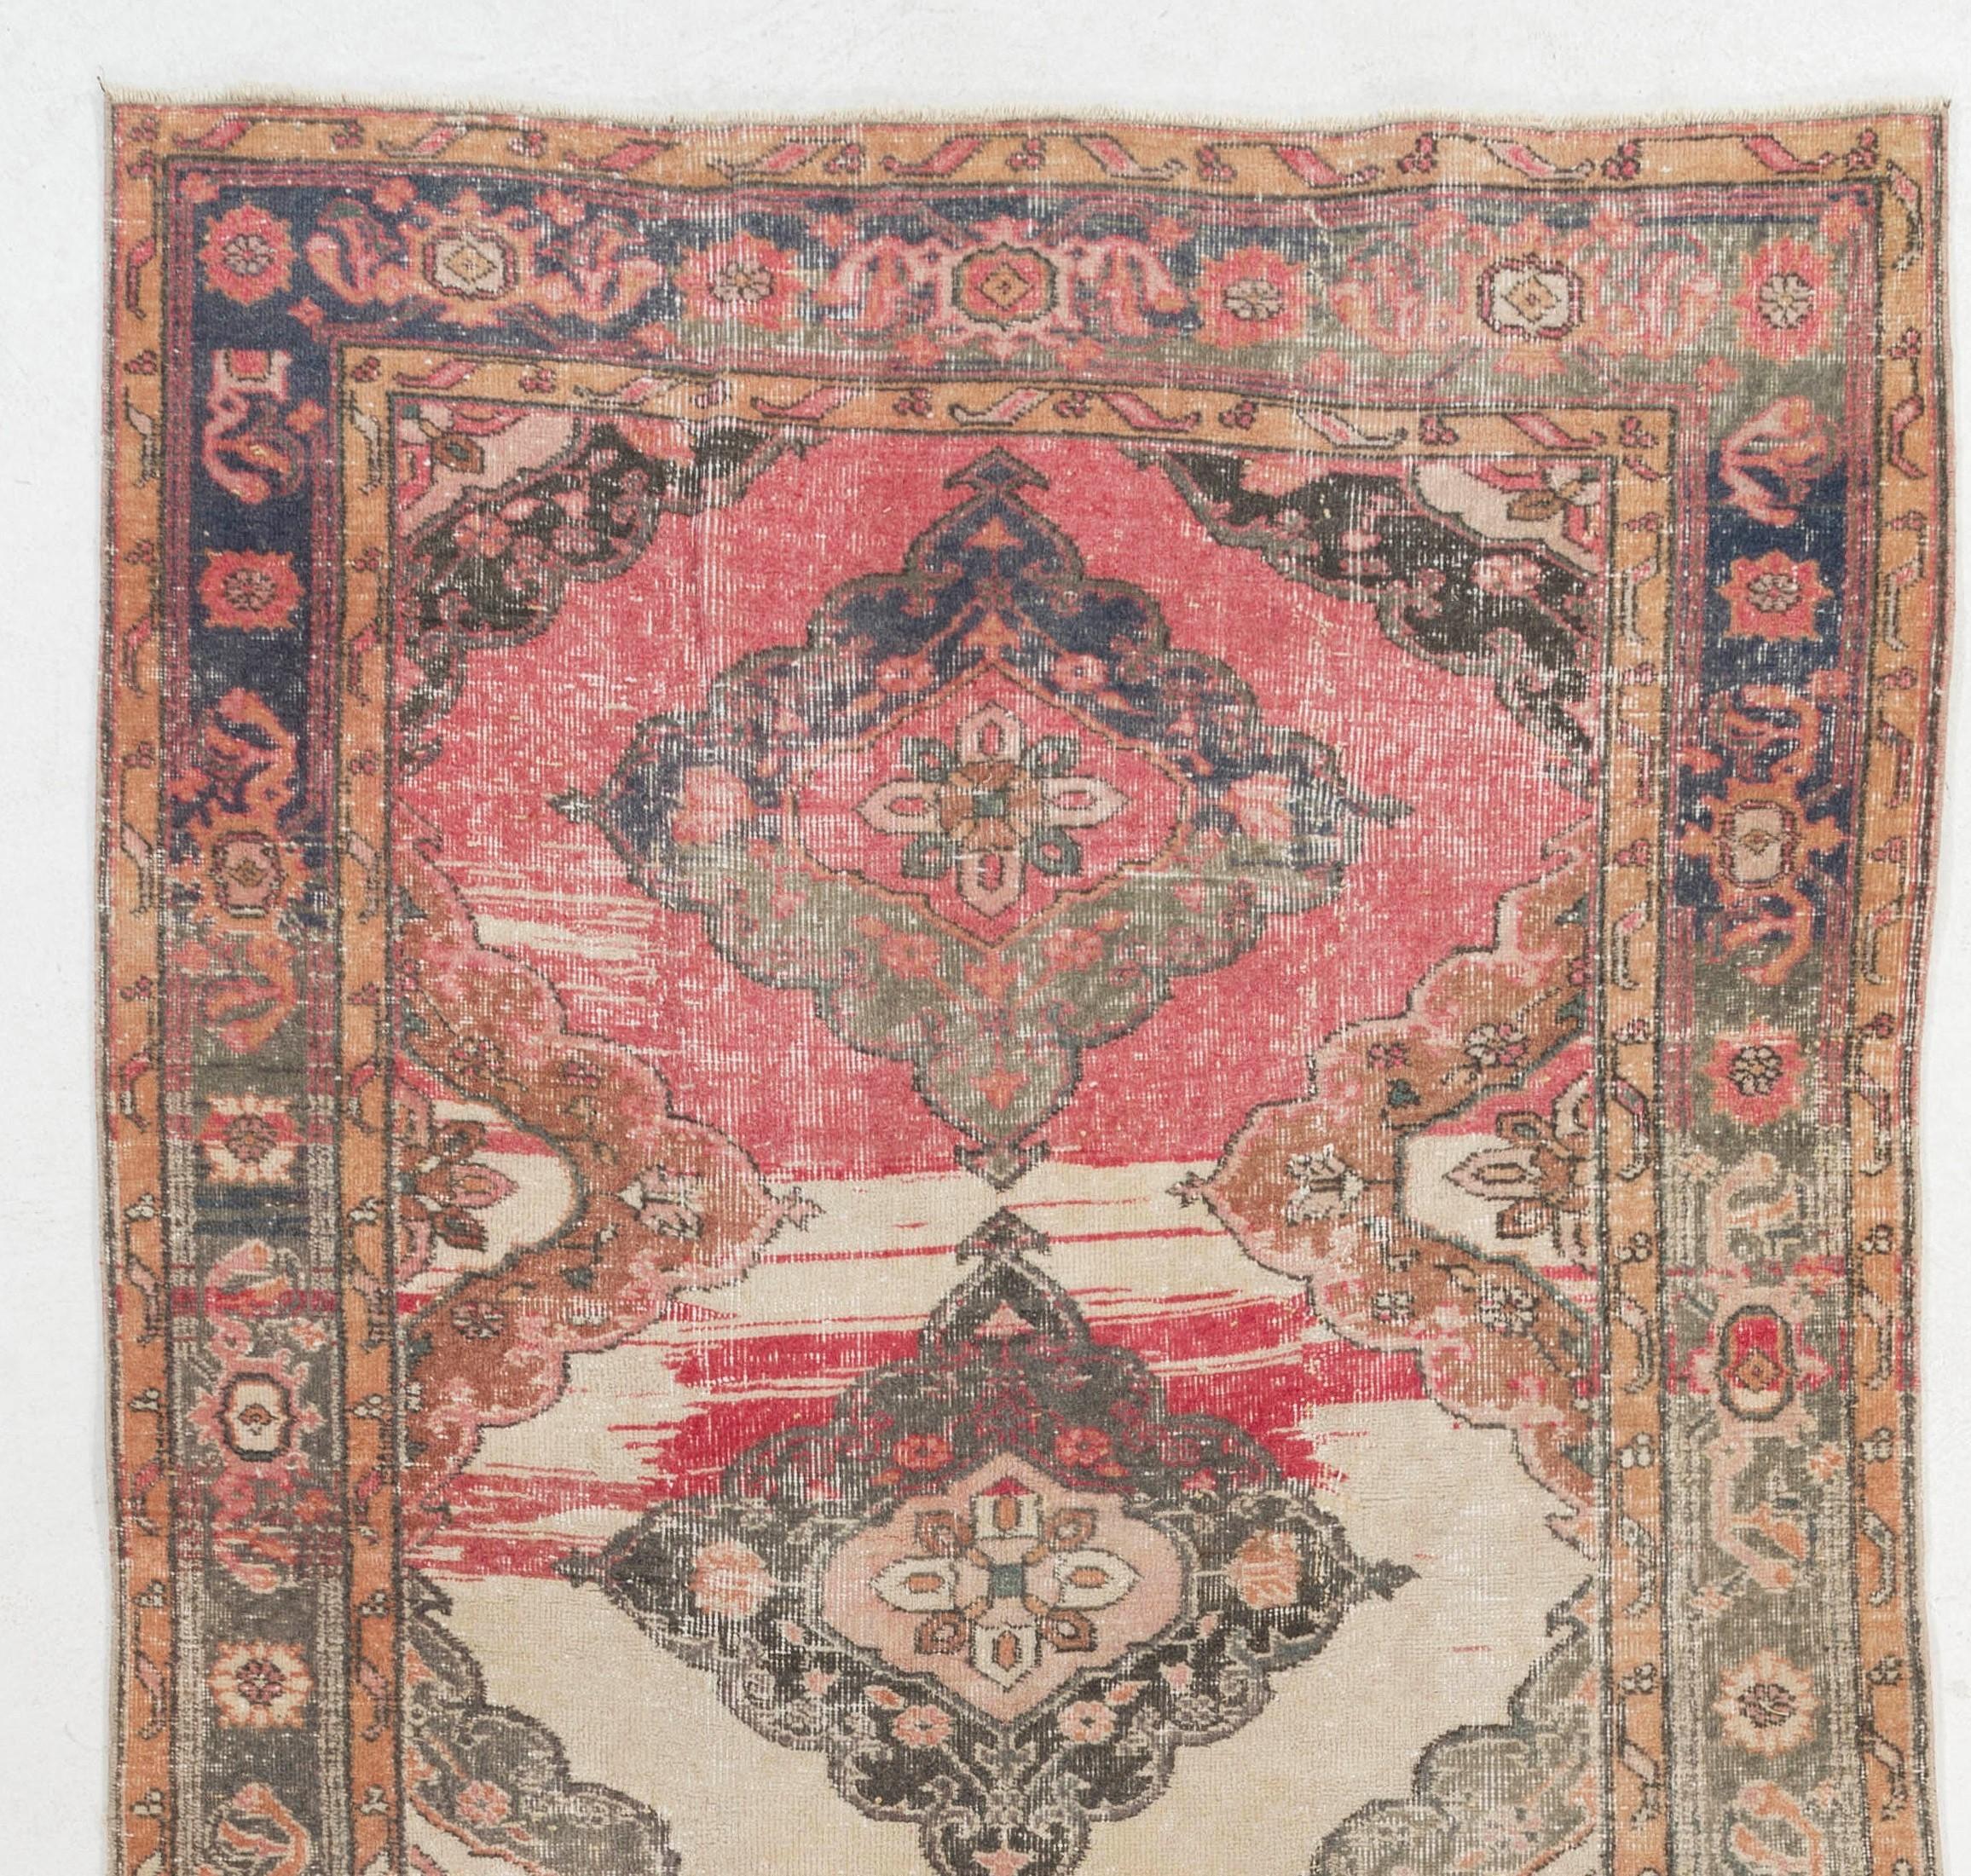 A Mid-20th century hand knotted runner from Central Anatolia with pleasing natural colors and wool pile on wool foundation. 
Size: 4.8 x 11.6 ft.
Very good condition. Sturdy and as clean as a brand new rug (deep washed professionally).